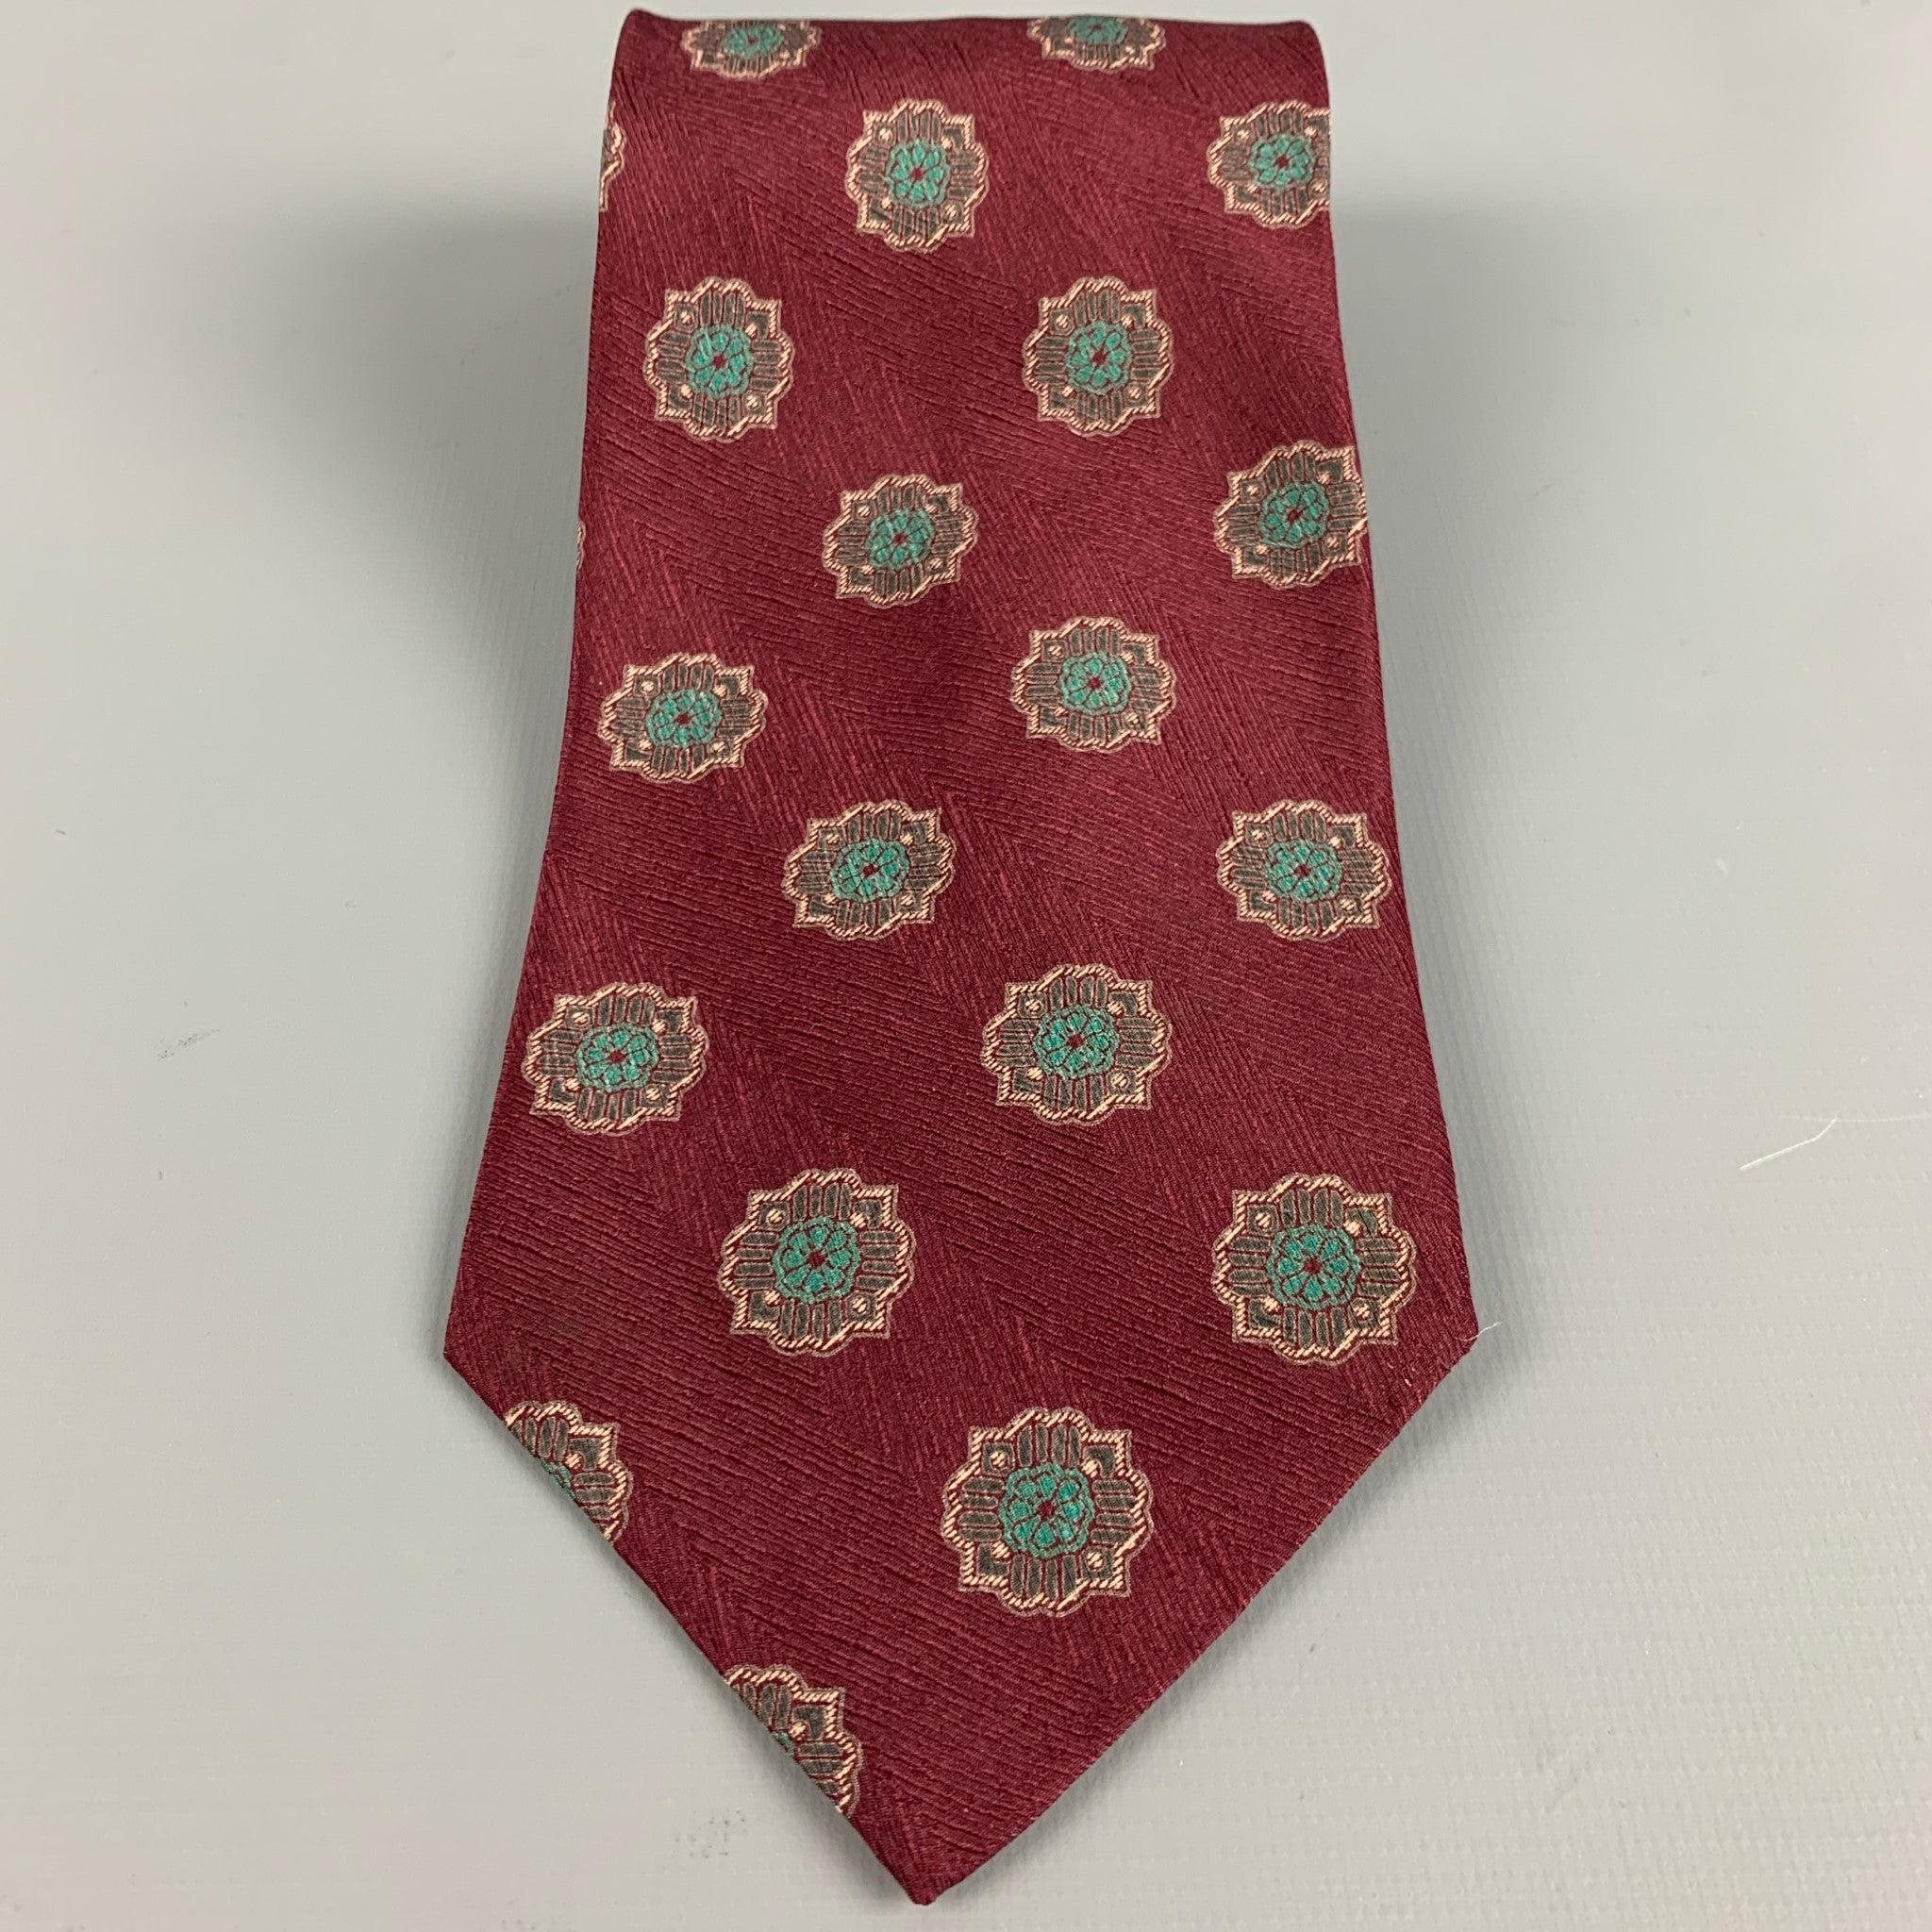 GIORGIO ARMANI
necktie in a burgundy silk featuring green abstract floral pattern. Made in Italy.Very Good Pre-Owned Condition. Minor signs of wear. 

Measurements: 
  Width: 3.5 inches Length: 56.5 inches 
  
  
 
Reference: 127314
Category: